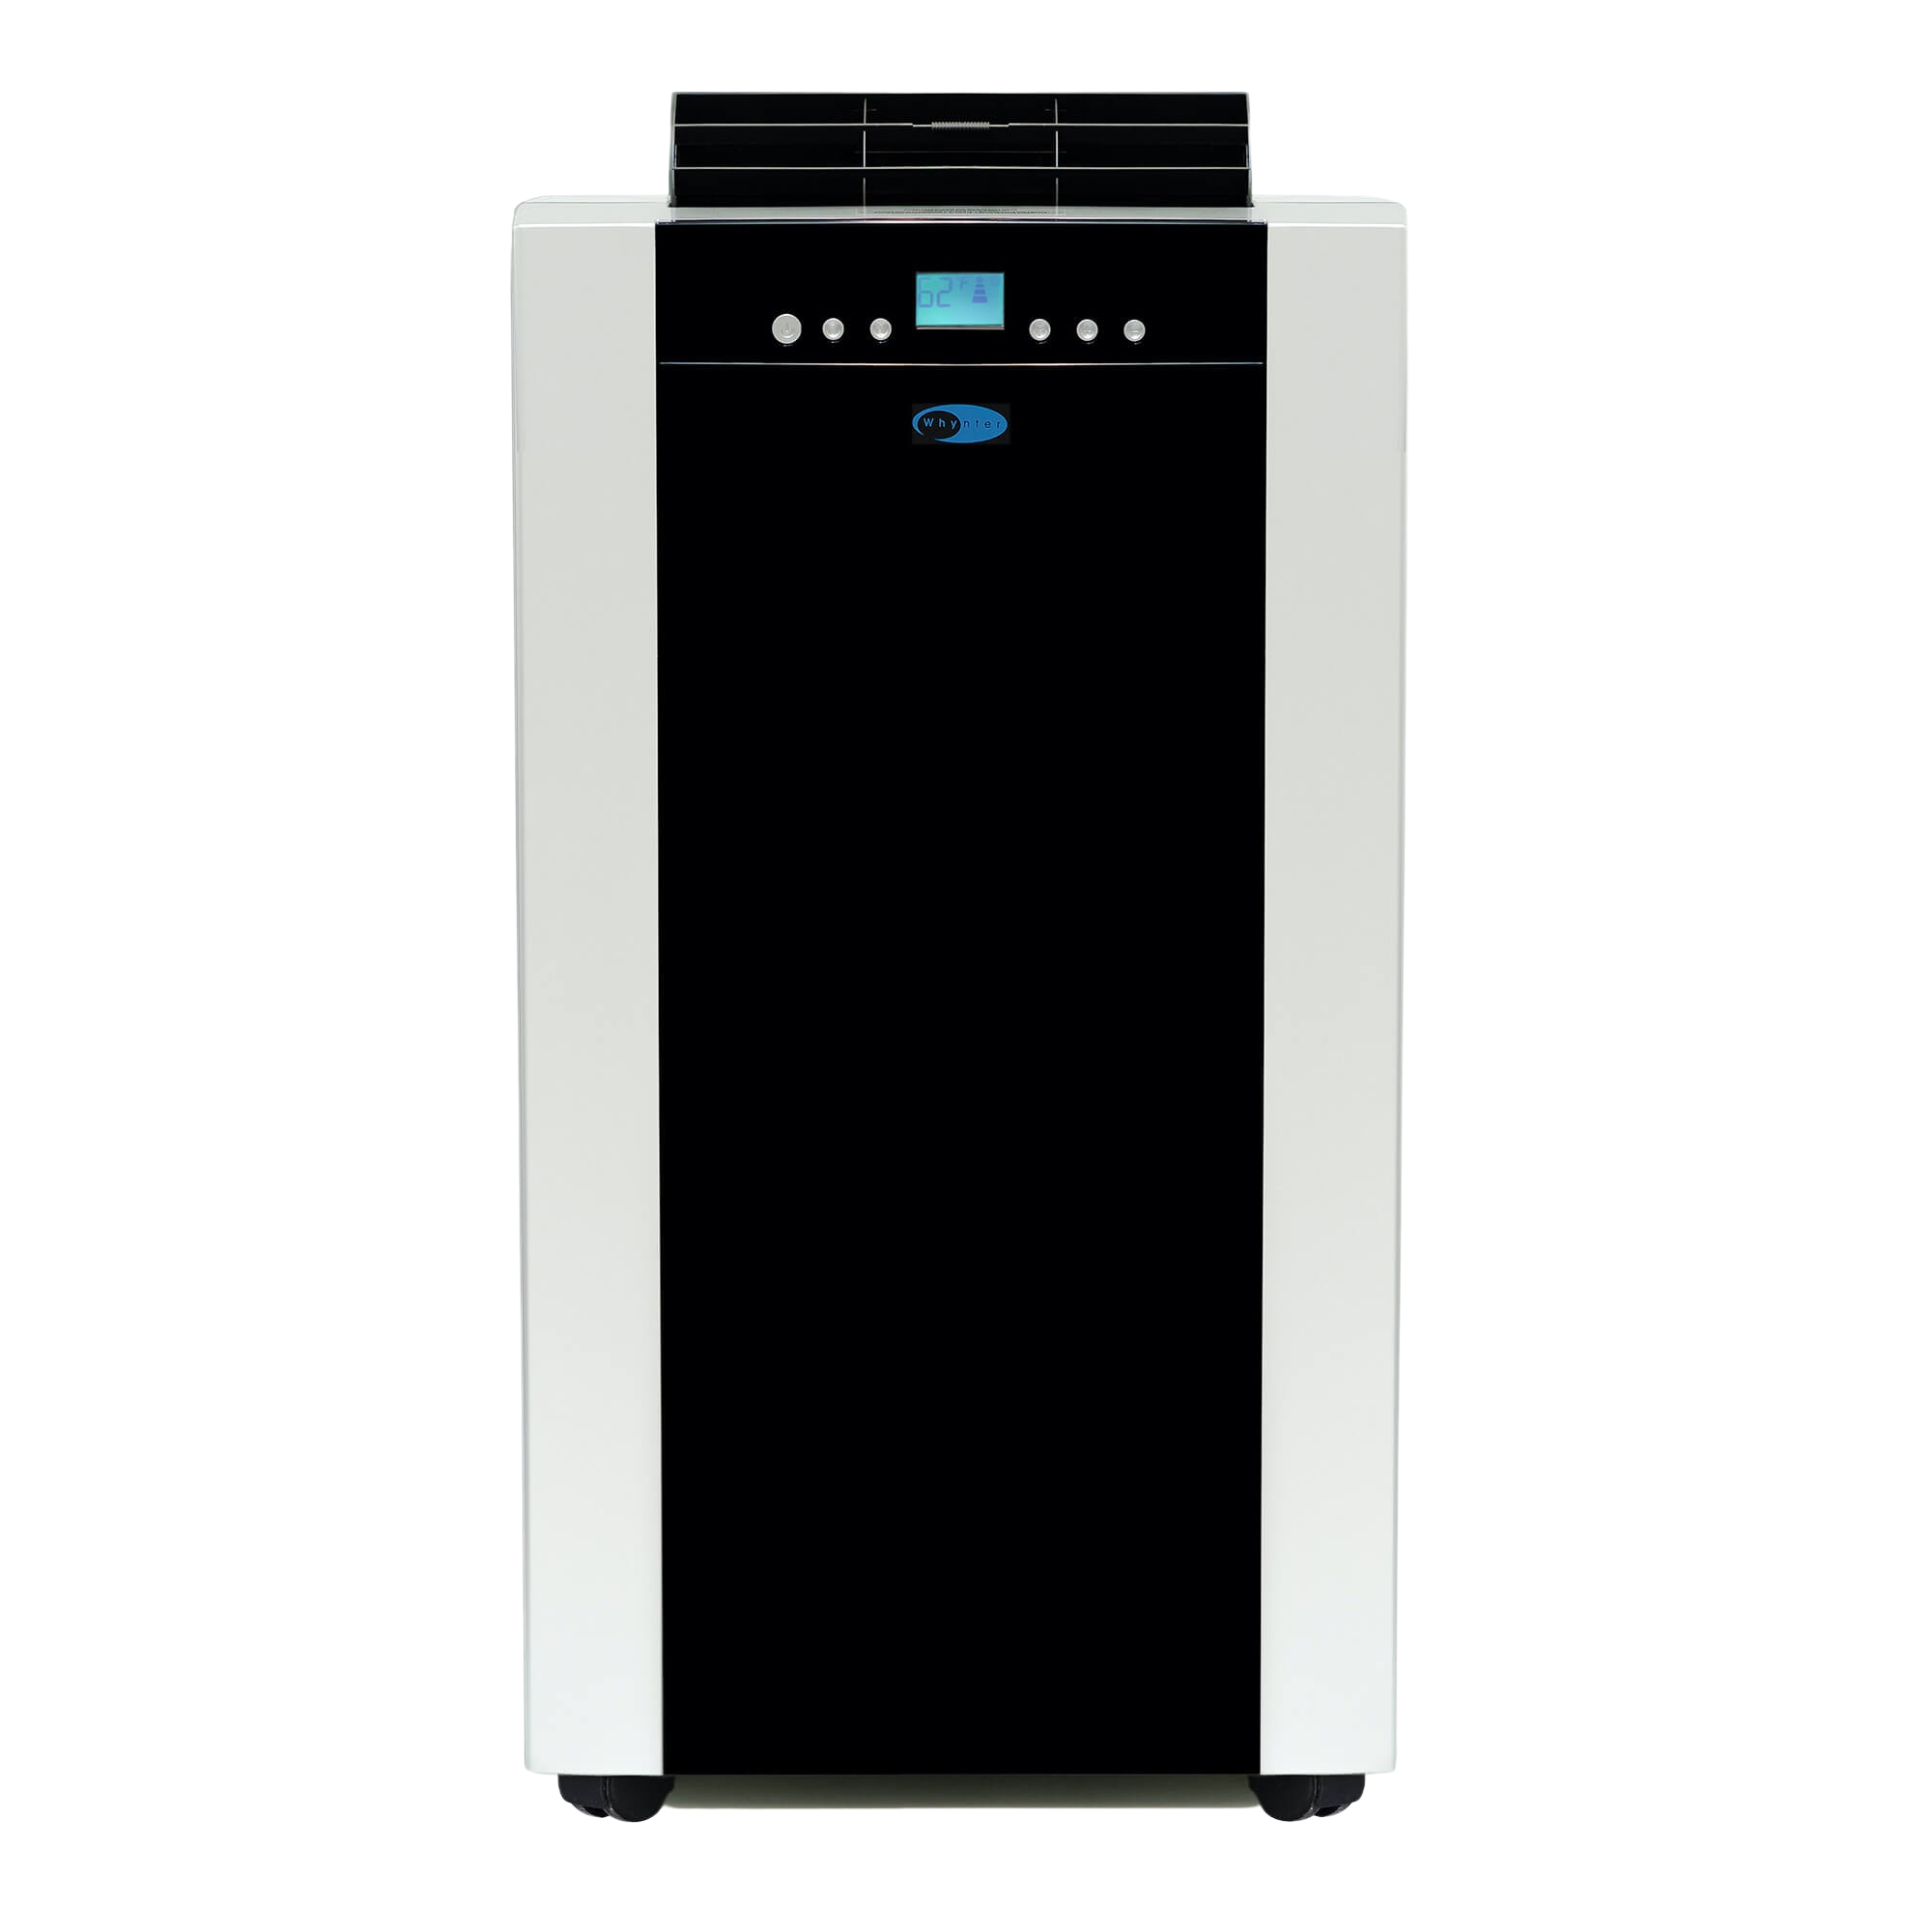 Whynter, Whynter ARC-14SH 14,000 BTU Portable Air Conditioner Heat with Dehumidifier New